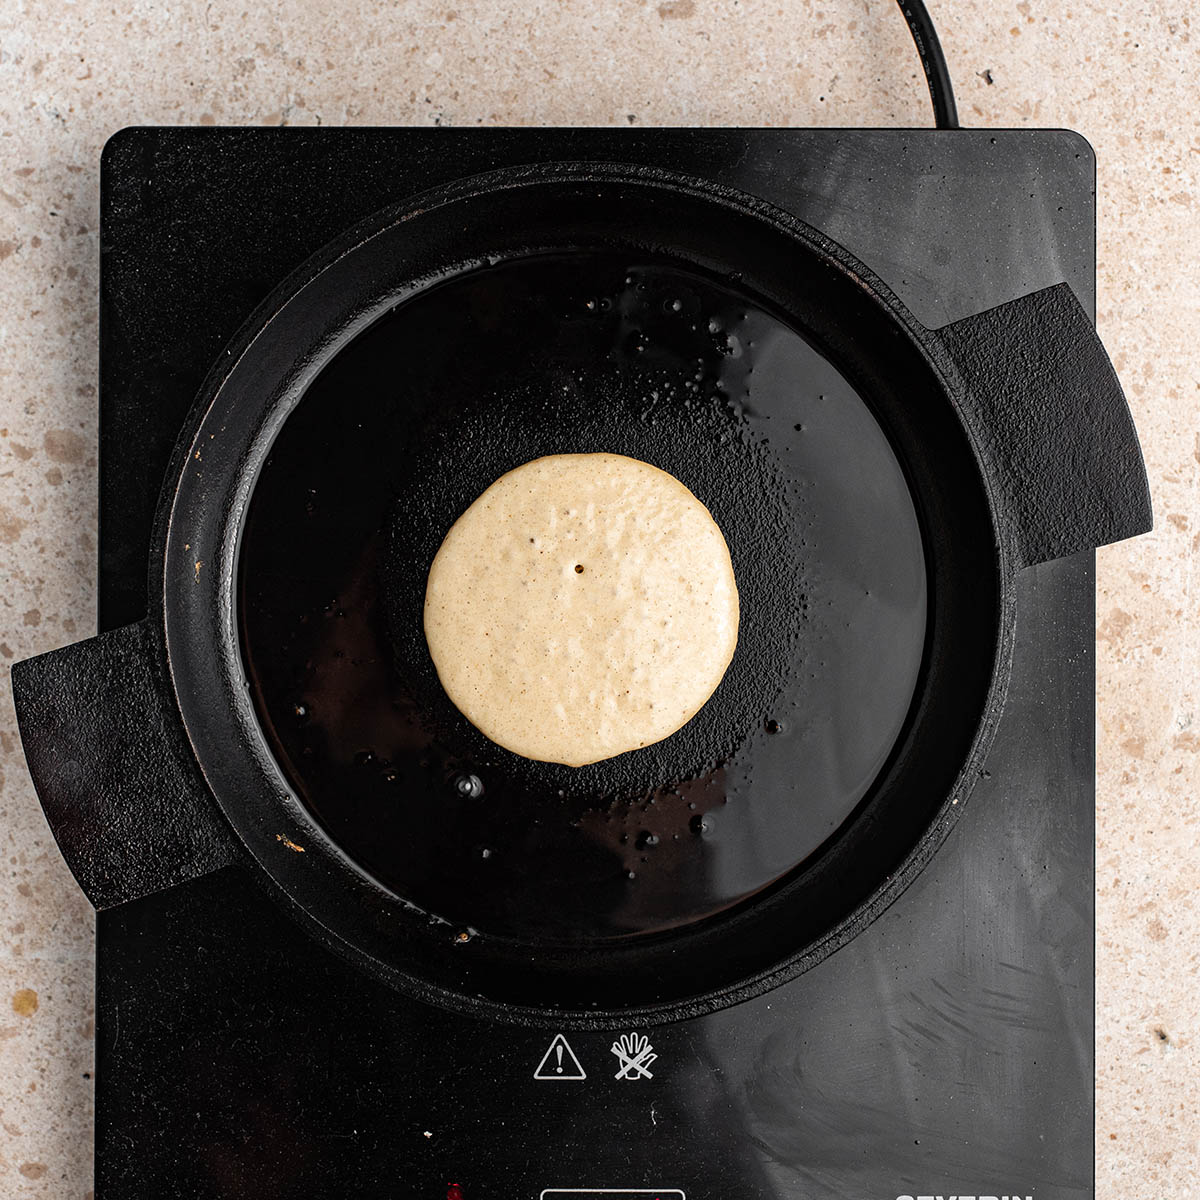 A pancake on a griddle.